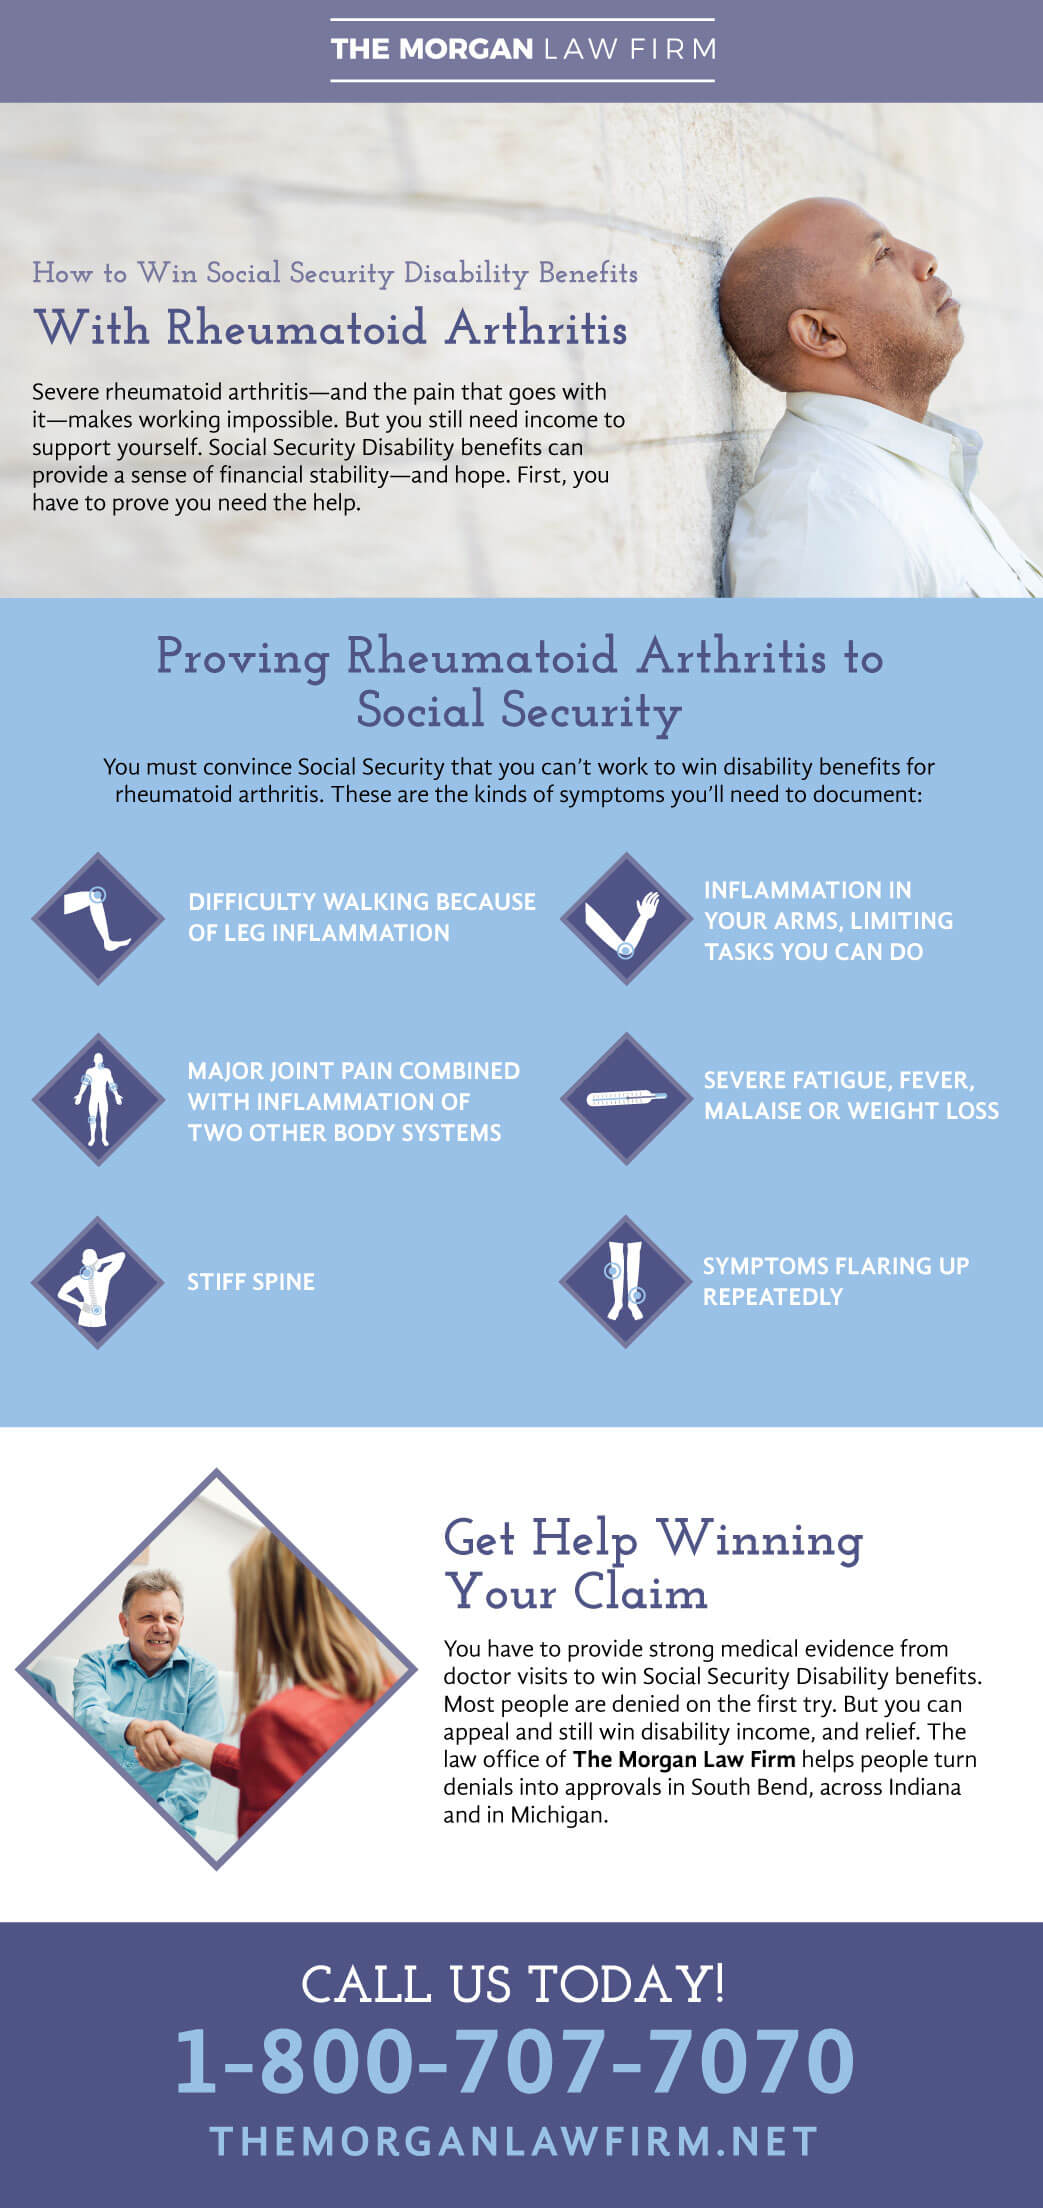 How to Win Social Security Disability Benefits with Rheumatoid Arthritis